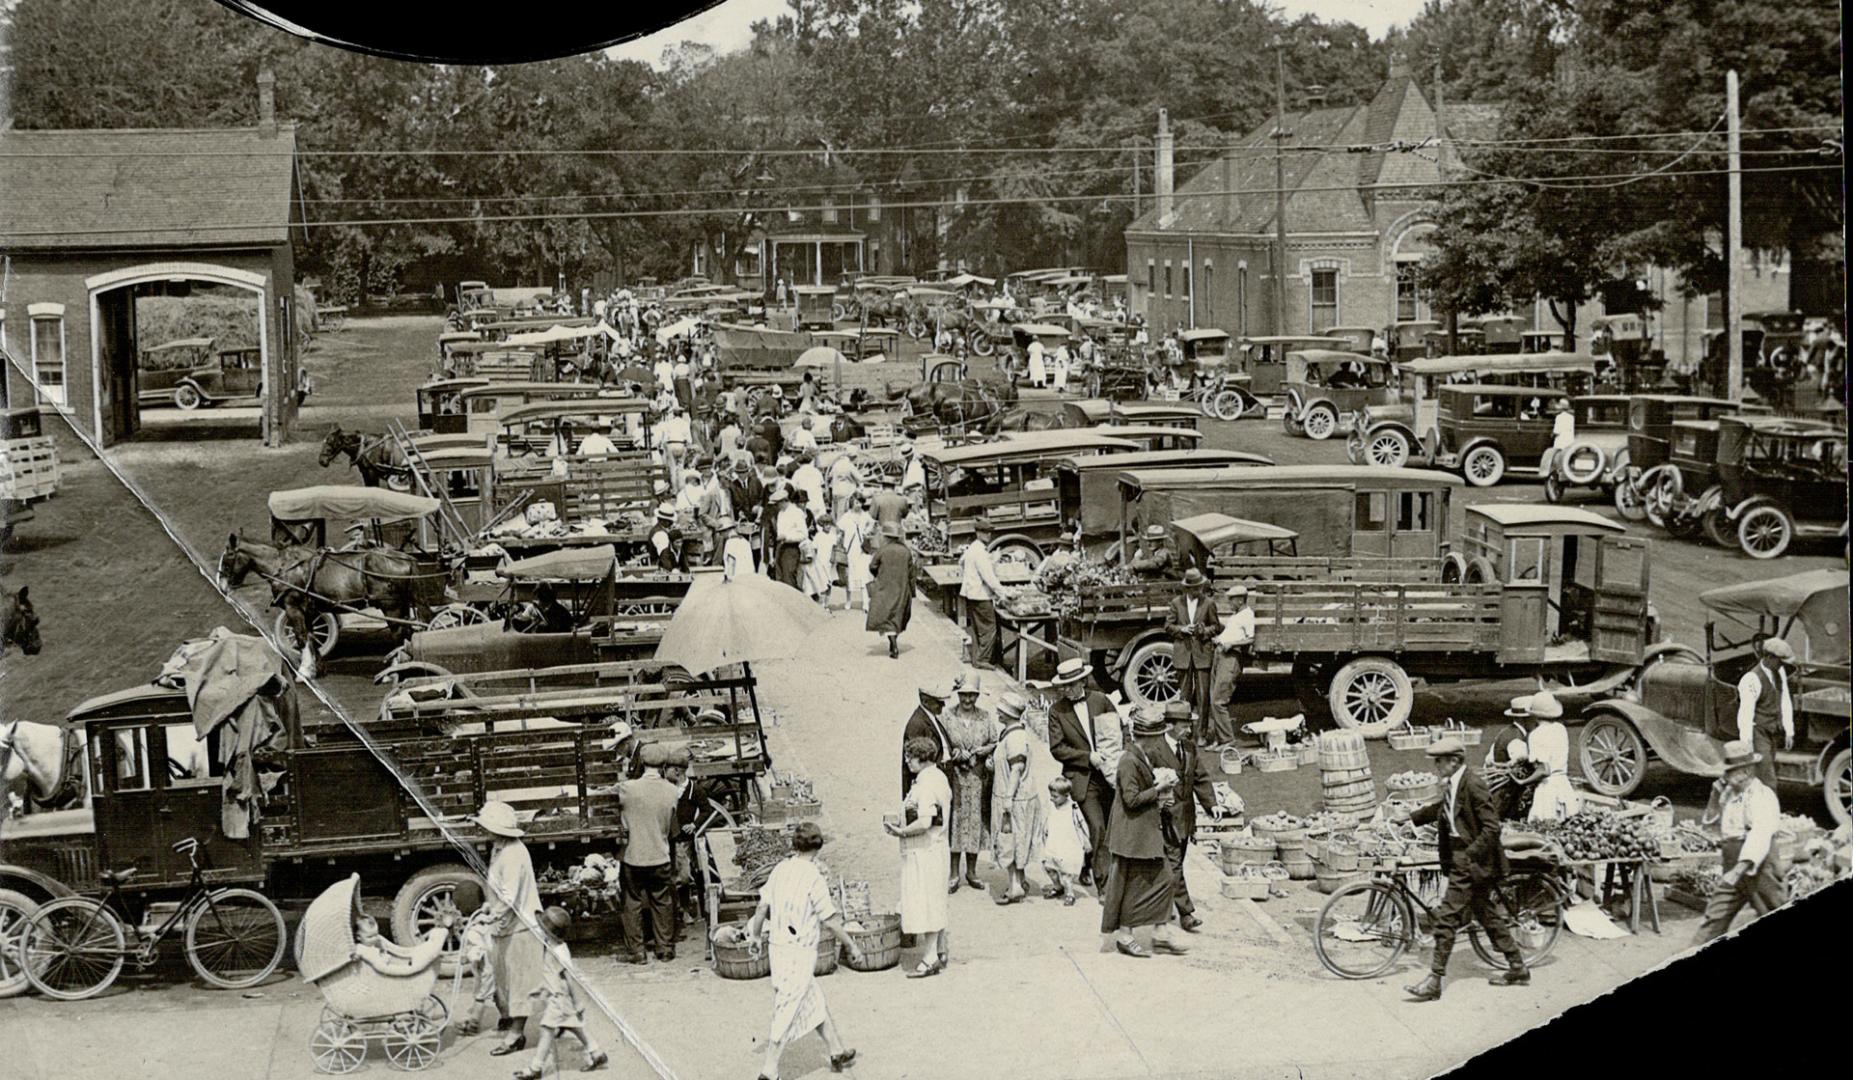 The busy market at St. Catharines